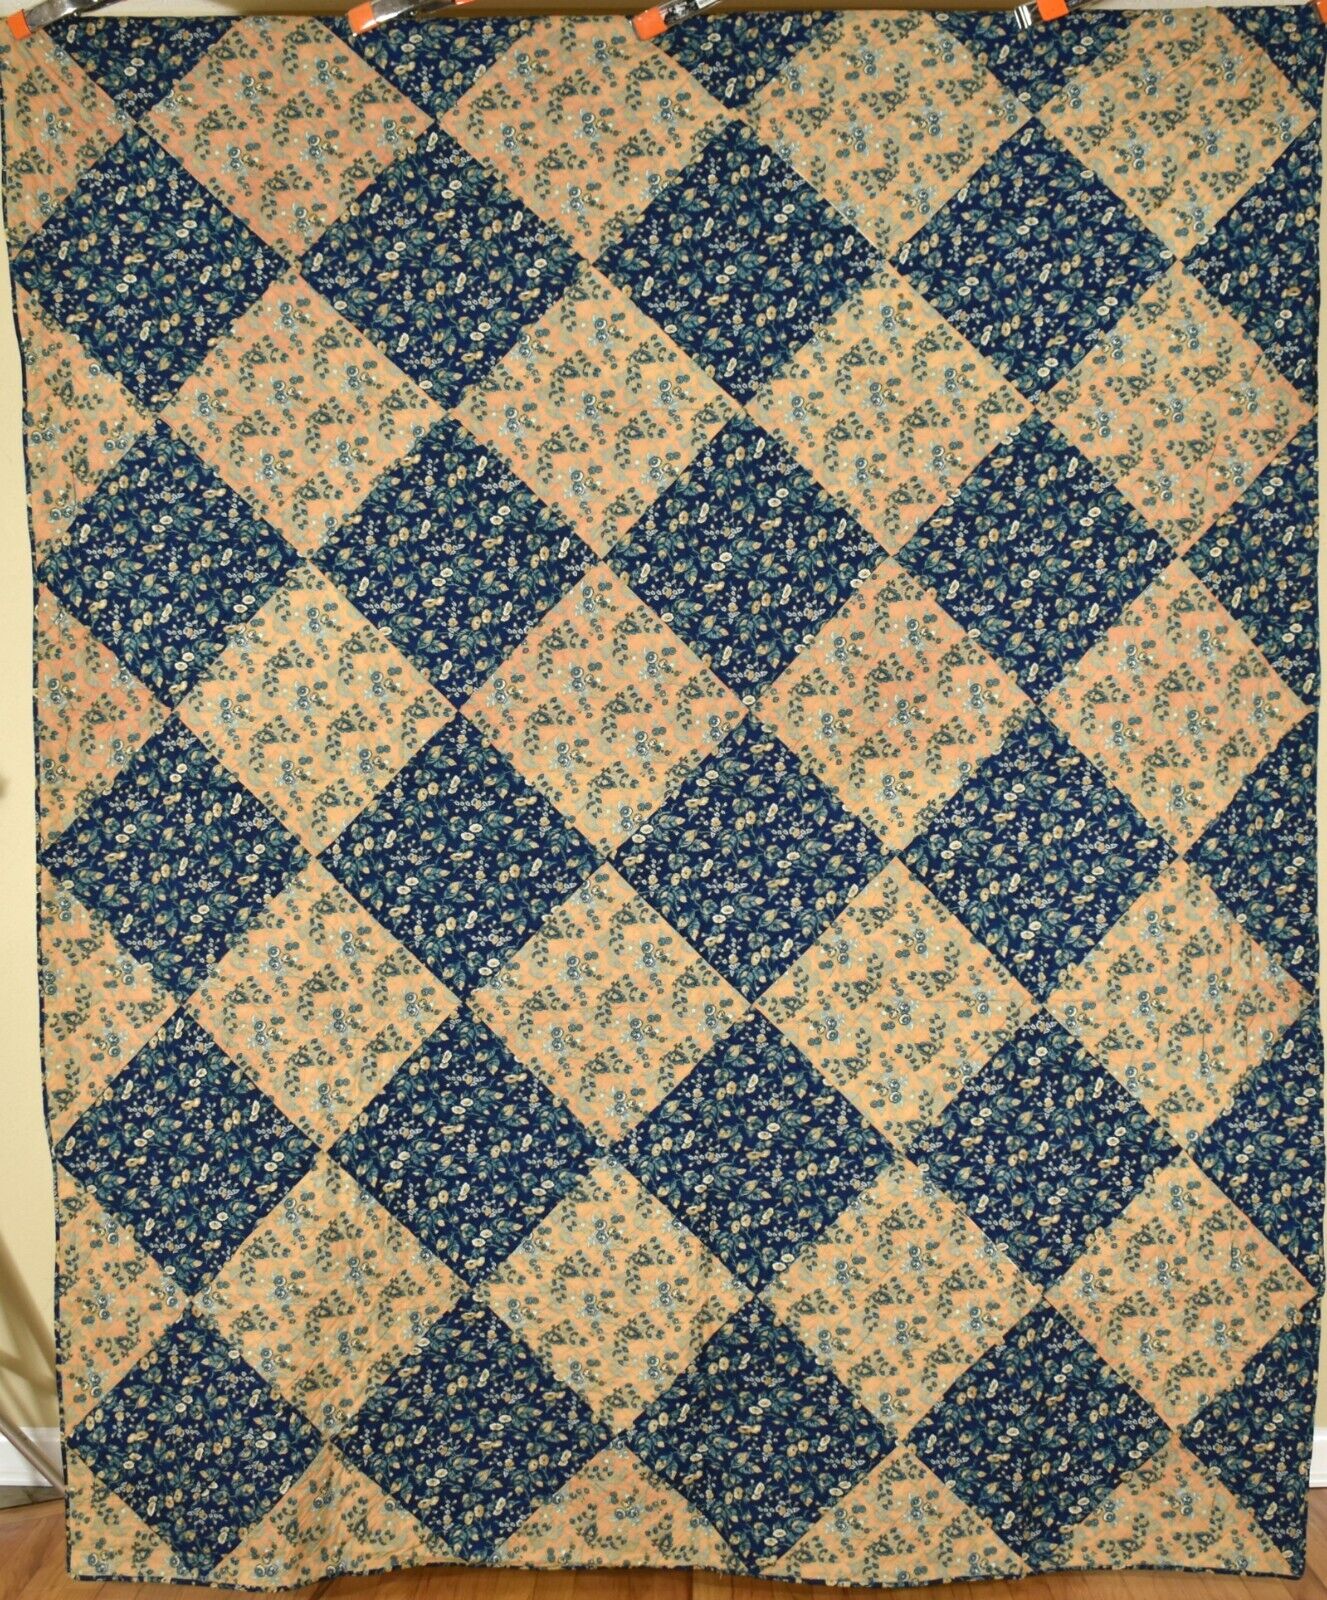 VERY EARLY 1830's Checkerboard / One Patch Antique Quilt ~BRILLIANT BLUES